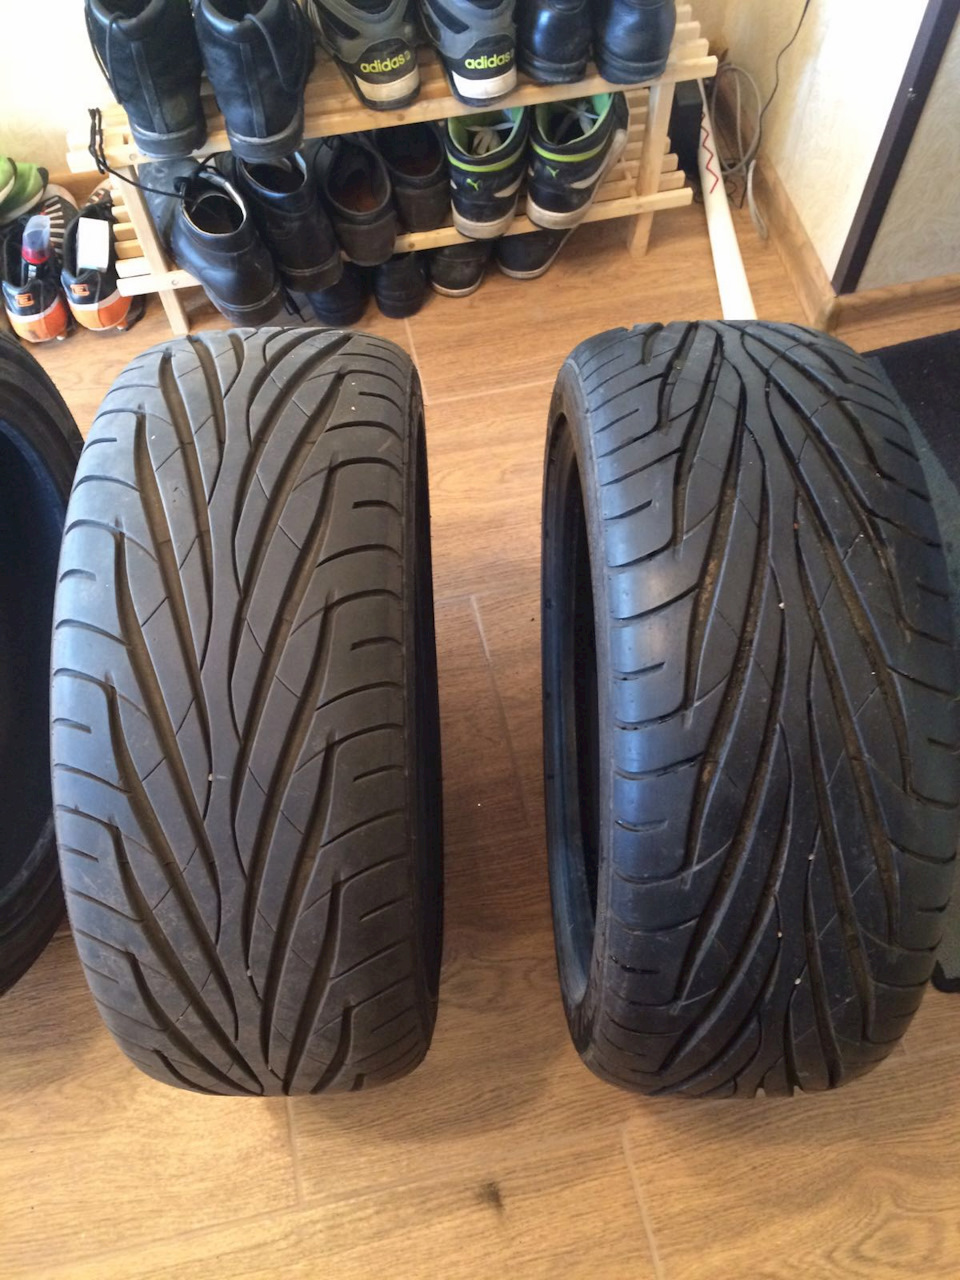 Шины максис виктра. Maxxis ma-z1 Victra. Maxxis z1. Maxxis Victra ma-z1 205/55 r16. Maxxis ma-z1 Victra 235/65 r17 25g.